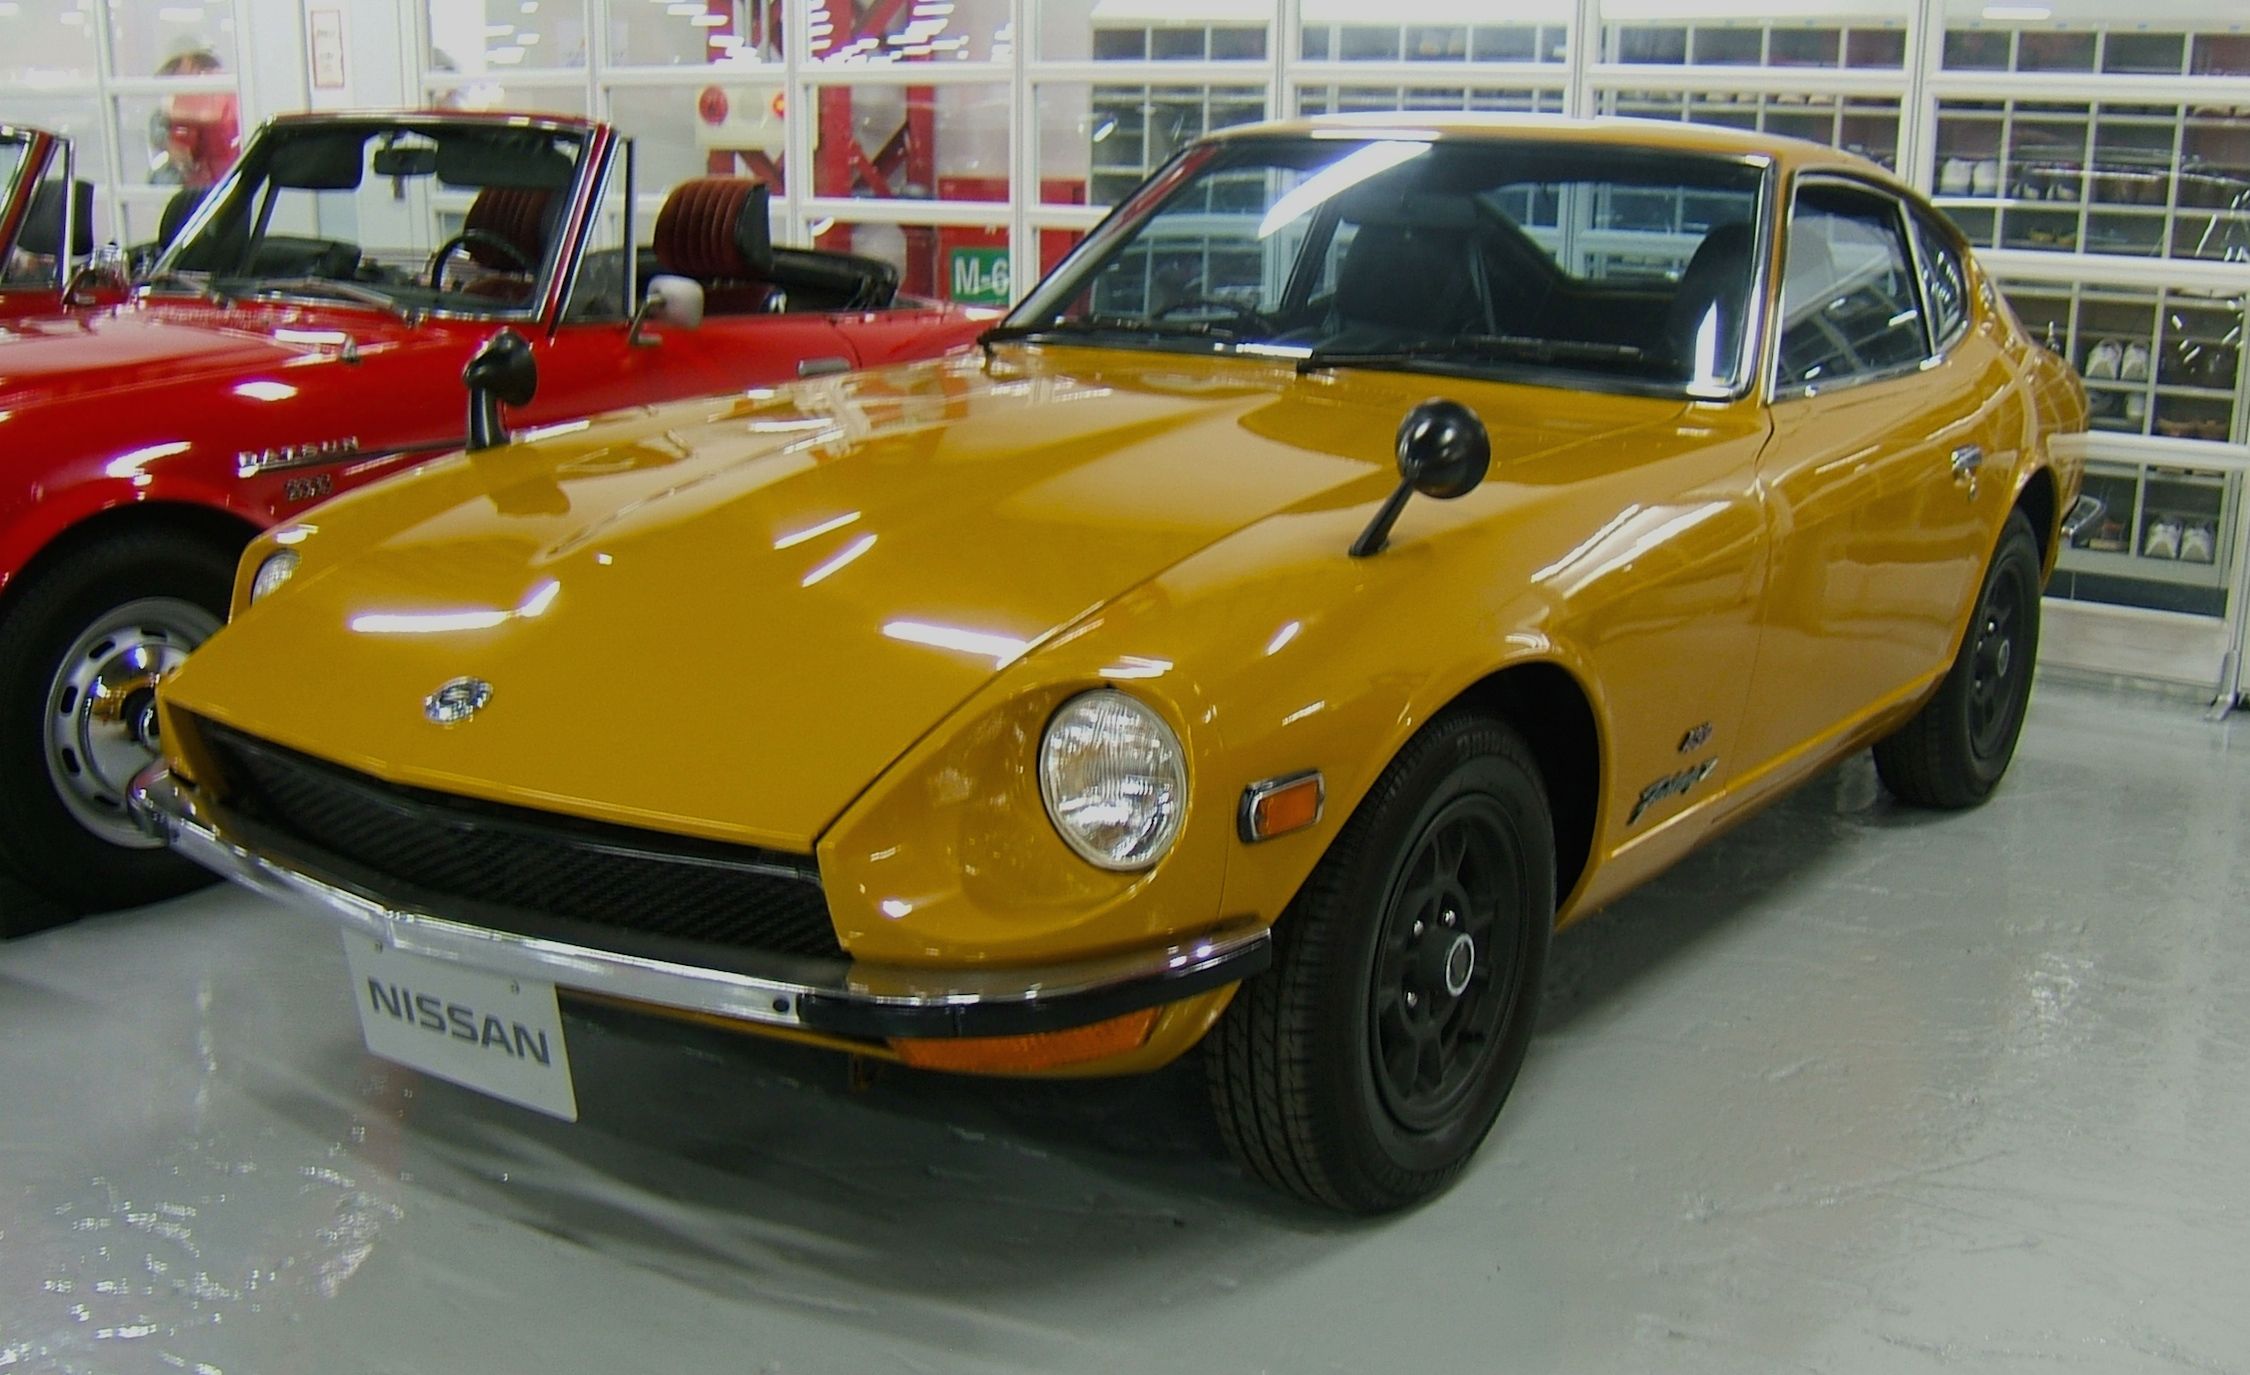 Skylines Fairladys And Even A Prince Highlights From The Weird Cool Nissan Heritage Collection